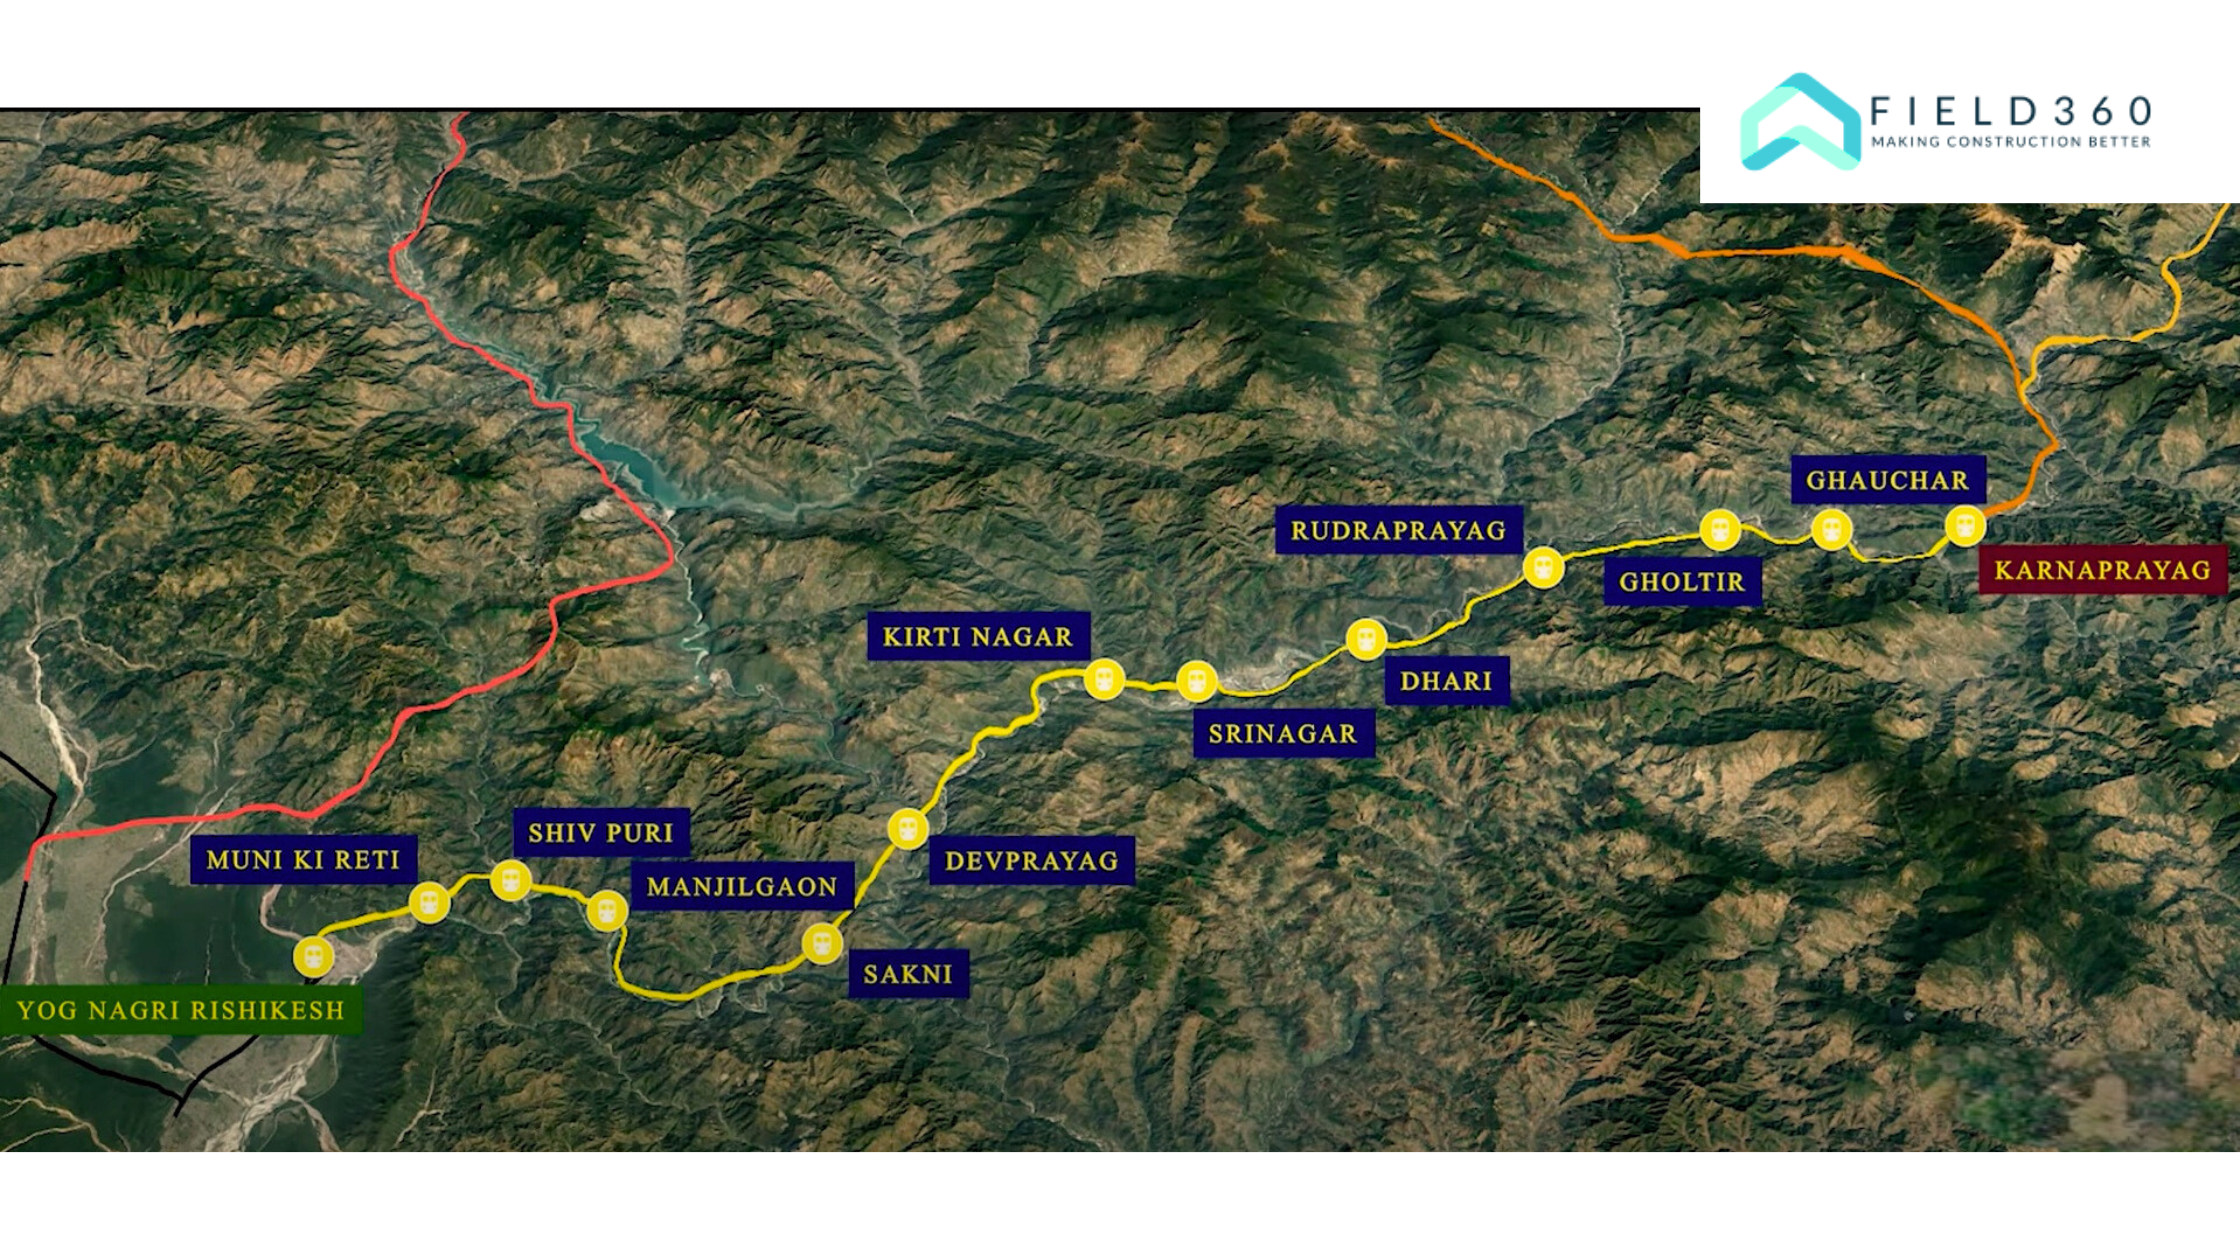 Char Dham Railway Project Connectivity